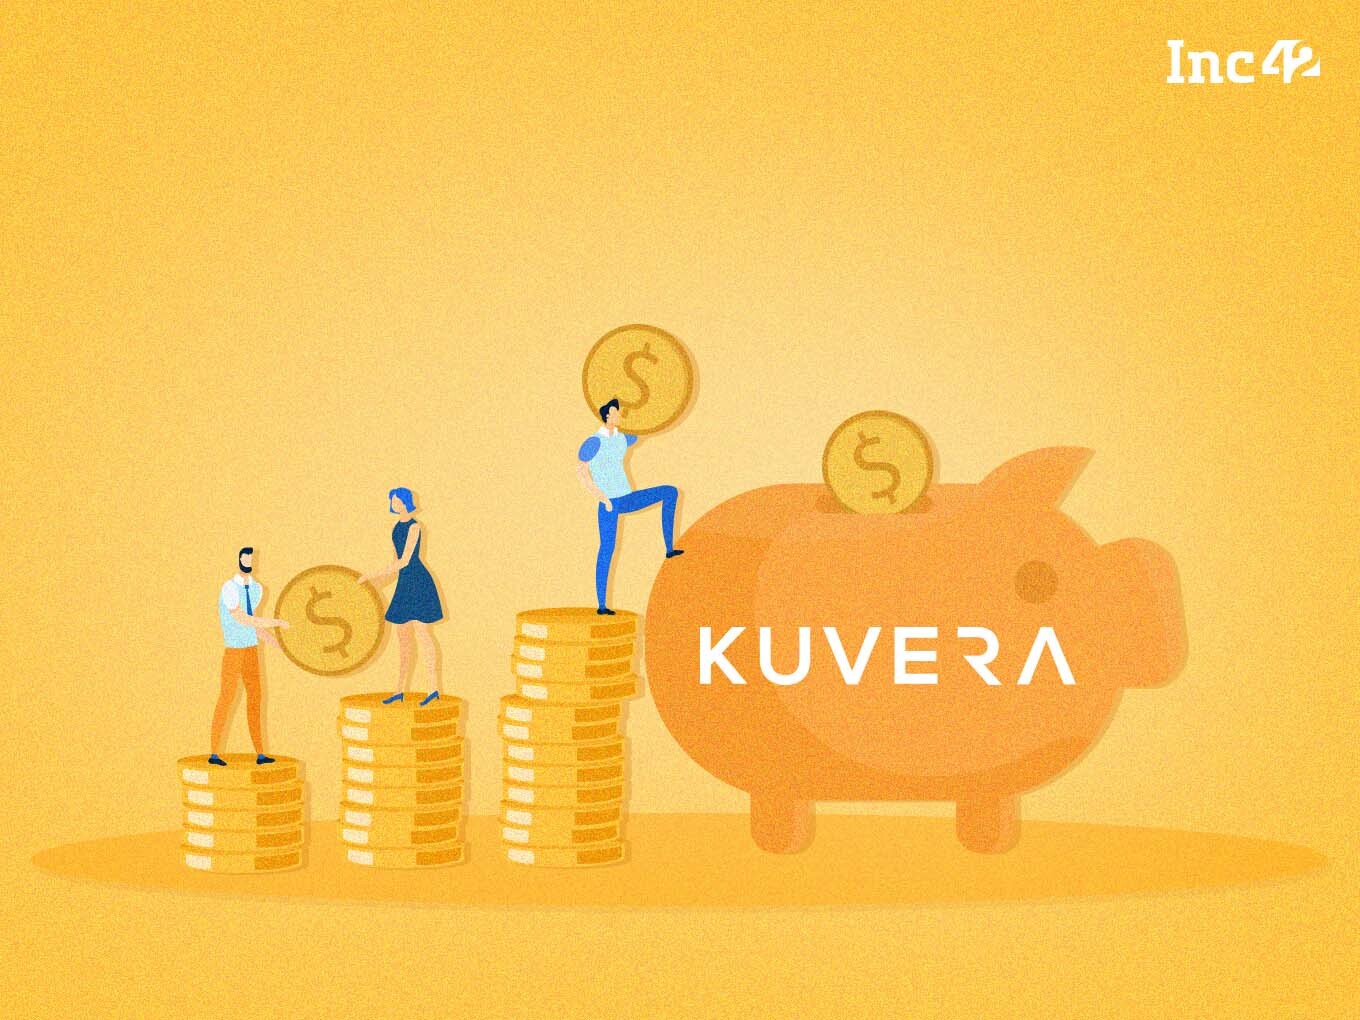 Exclusive: Wealth Management Startup Kuvera Raises INR 36.7 Cr As Part Of Series B